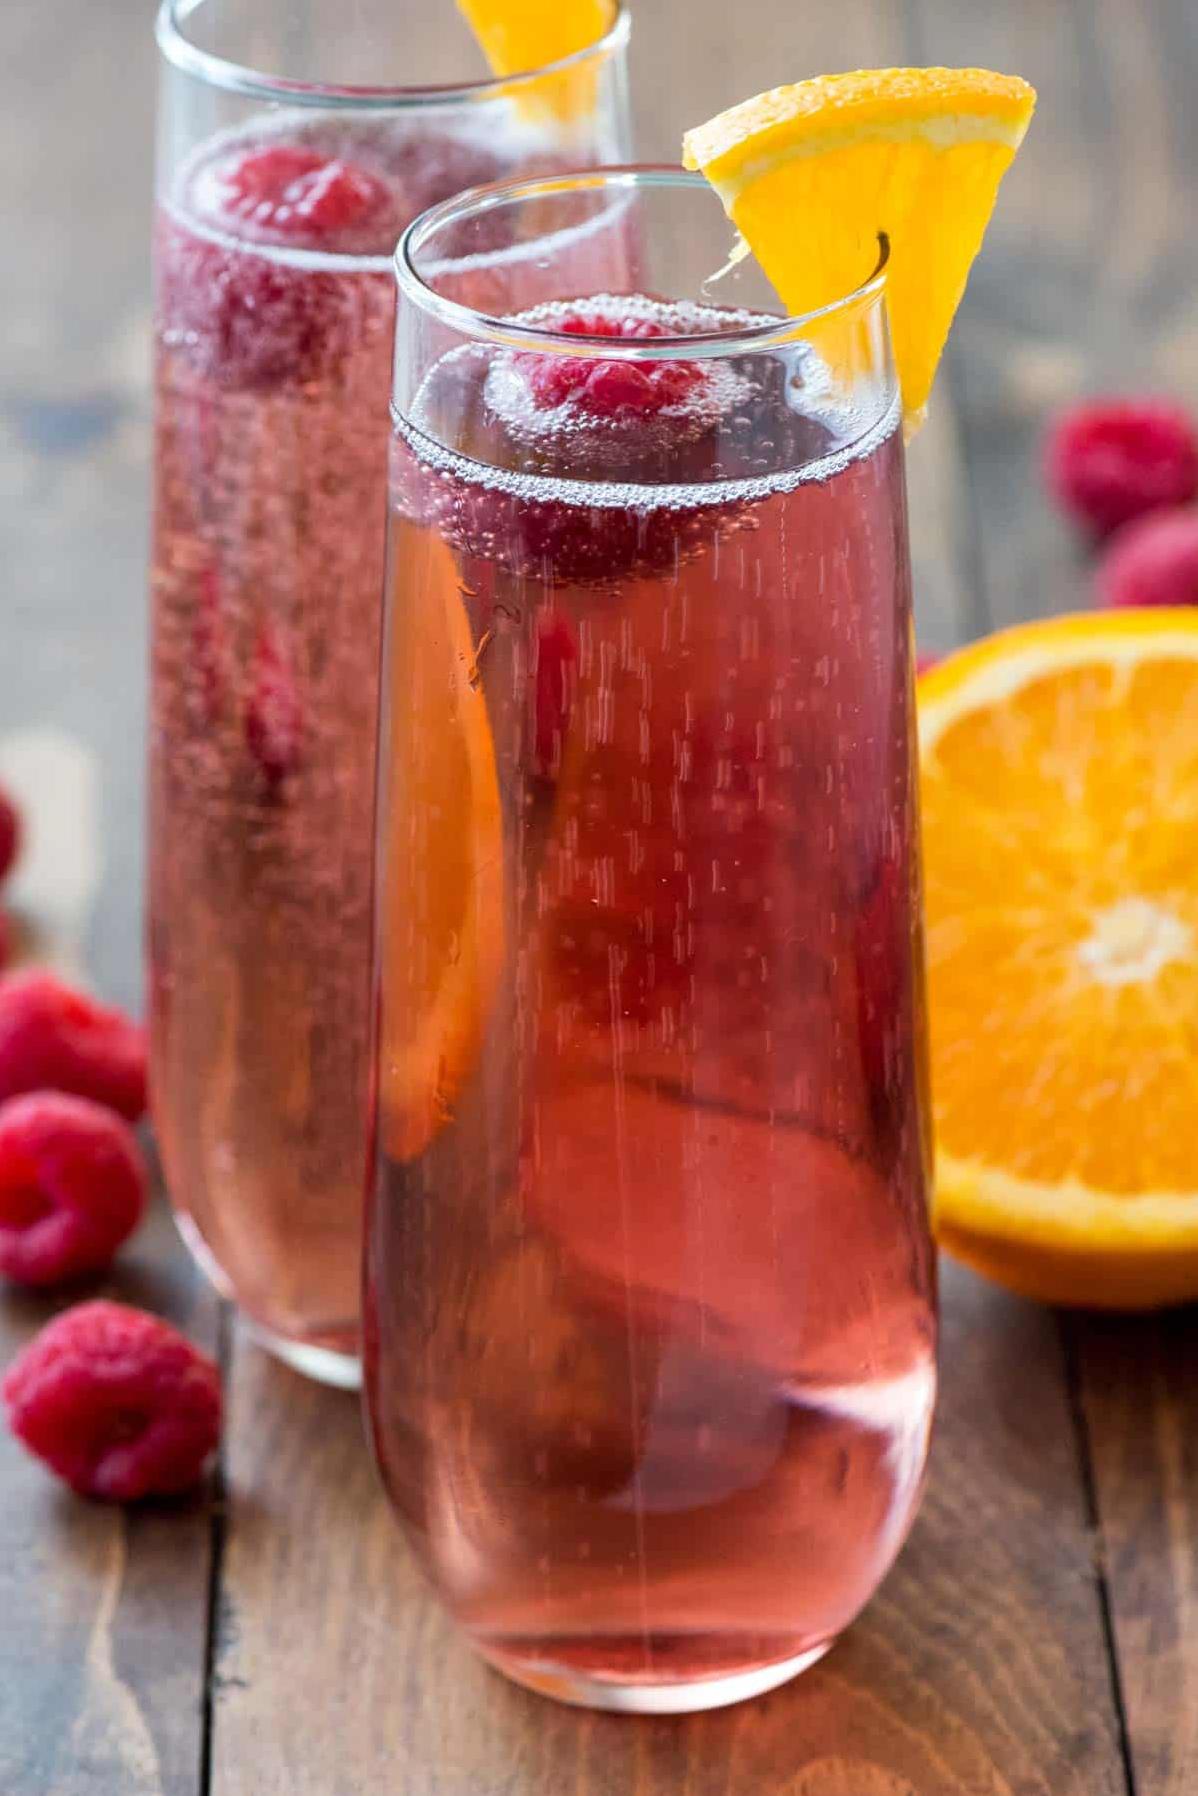  Celebrate in style with this fun and festive Mock Pink Champagne Punch!